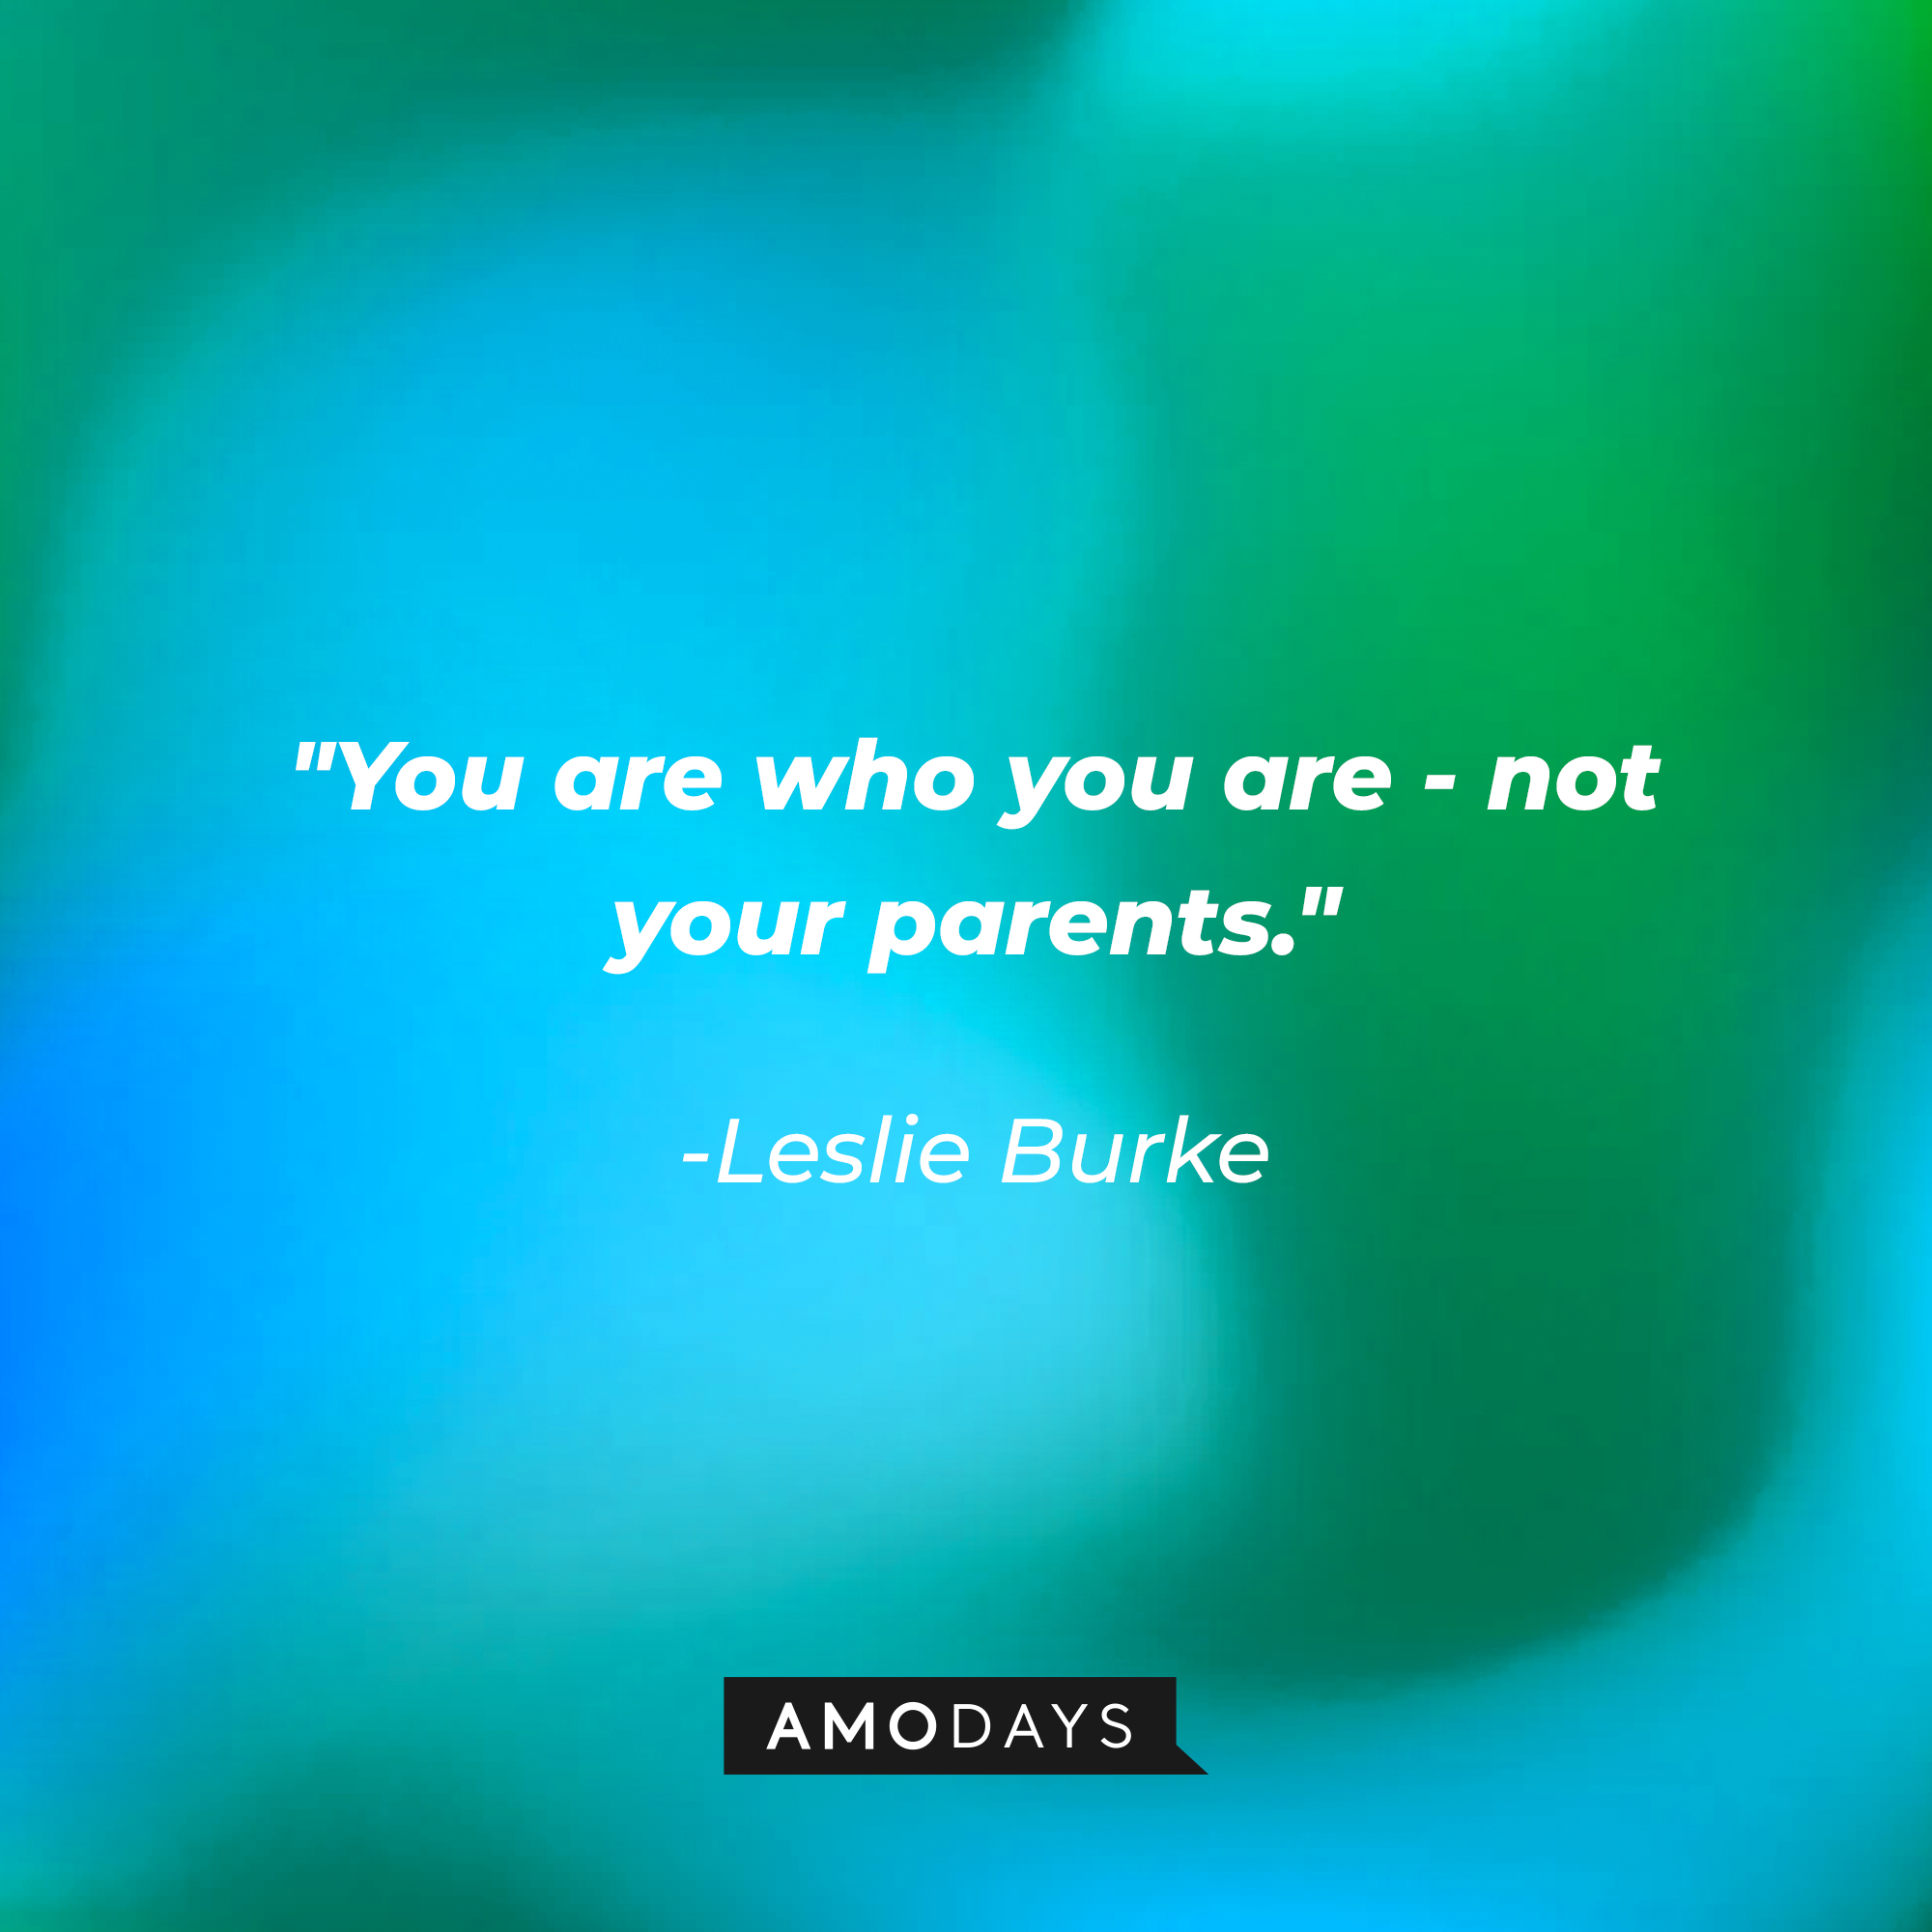 Leslie Burke's quote: "You are who you are - not your parents." | Source: Amodays